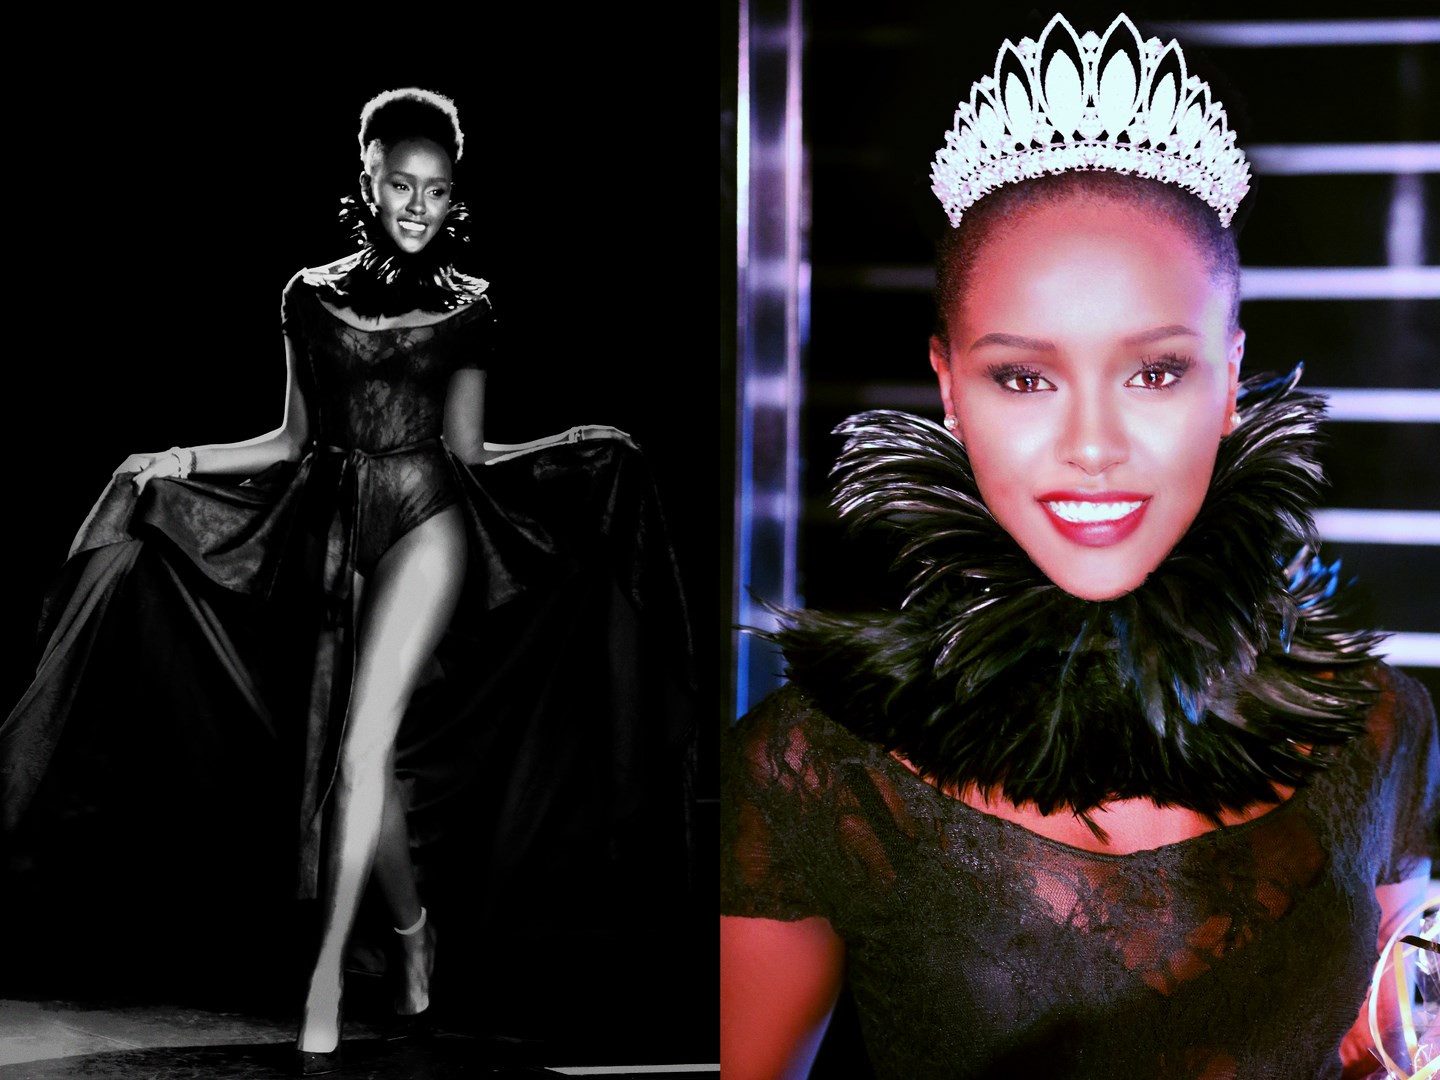 MISS EAST AFRICA FRANCE is from Kenya this year